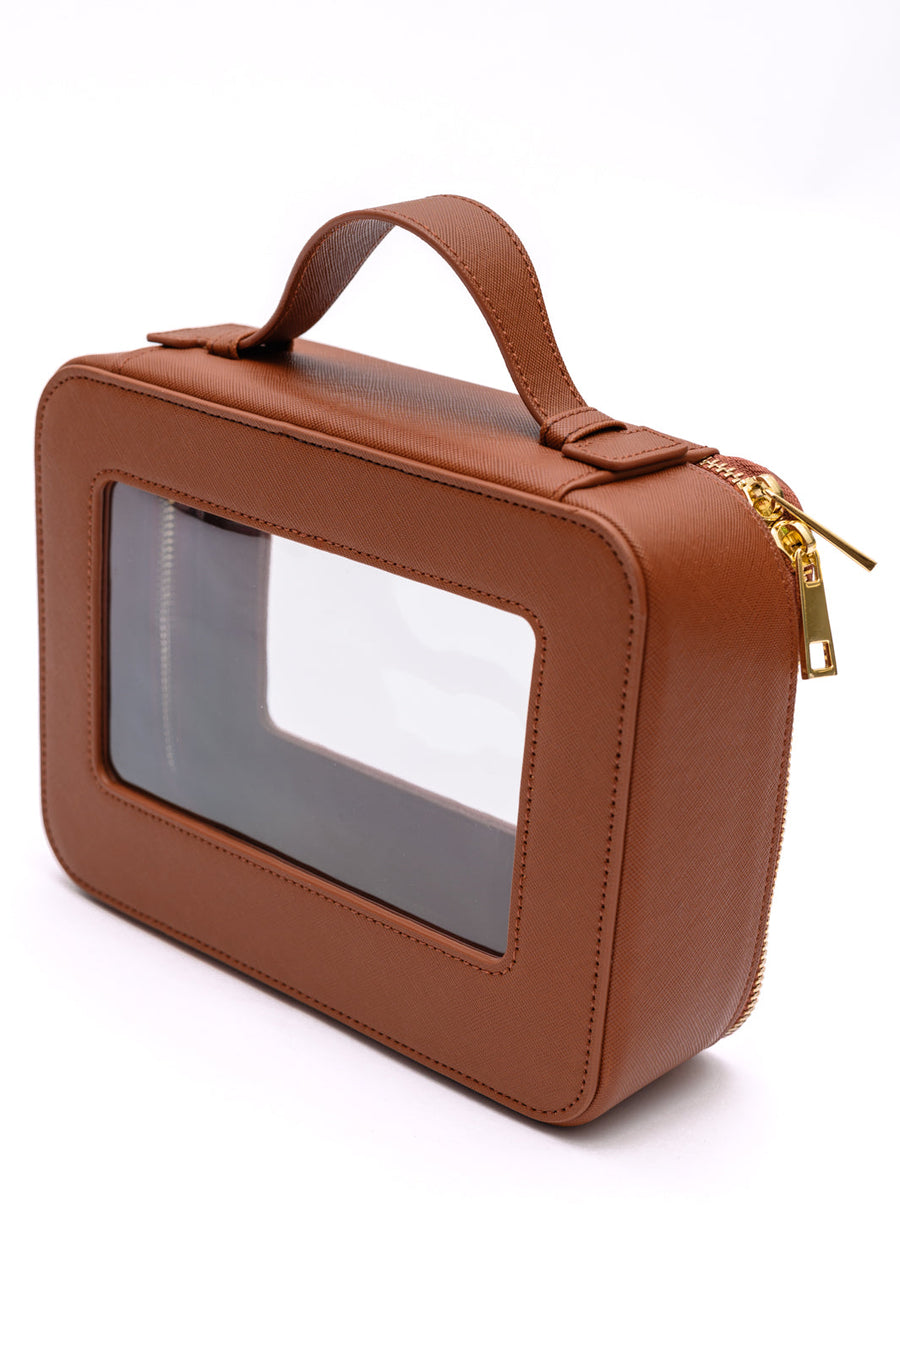 Leather Travel Cosmetic Case in Camel